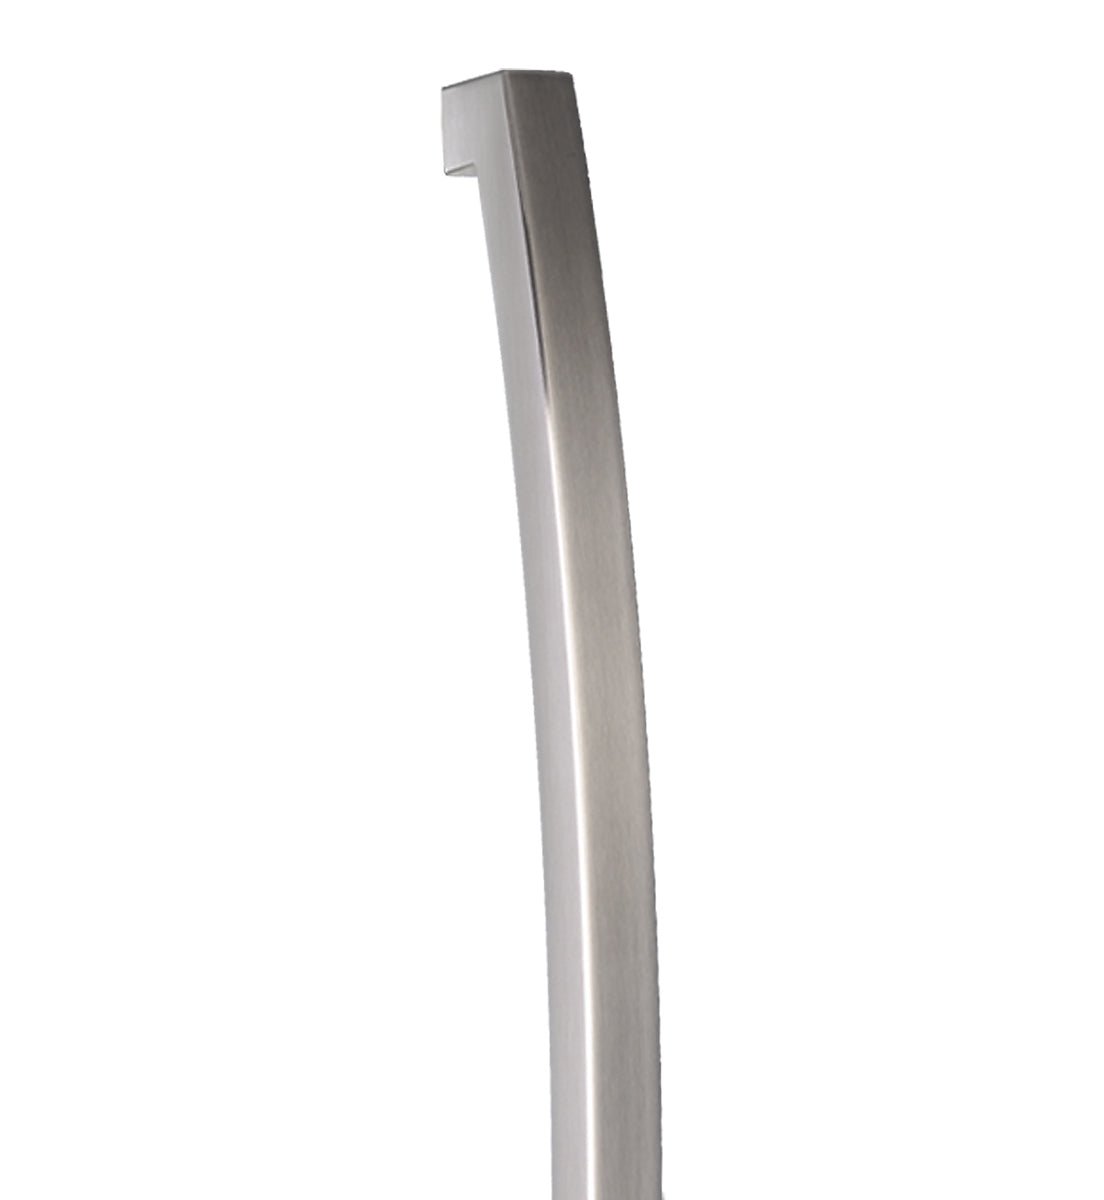 8380 Single Entrance Handle, Rear Disk Fix, 625mm x 25mm x 25mm, CTC 600mm in Satin Stainless